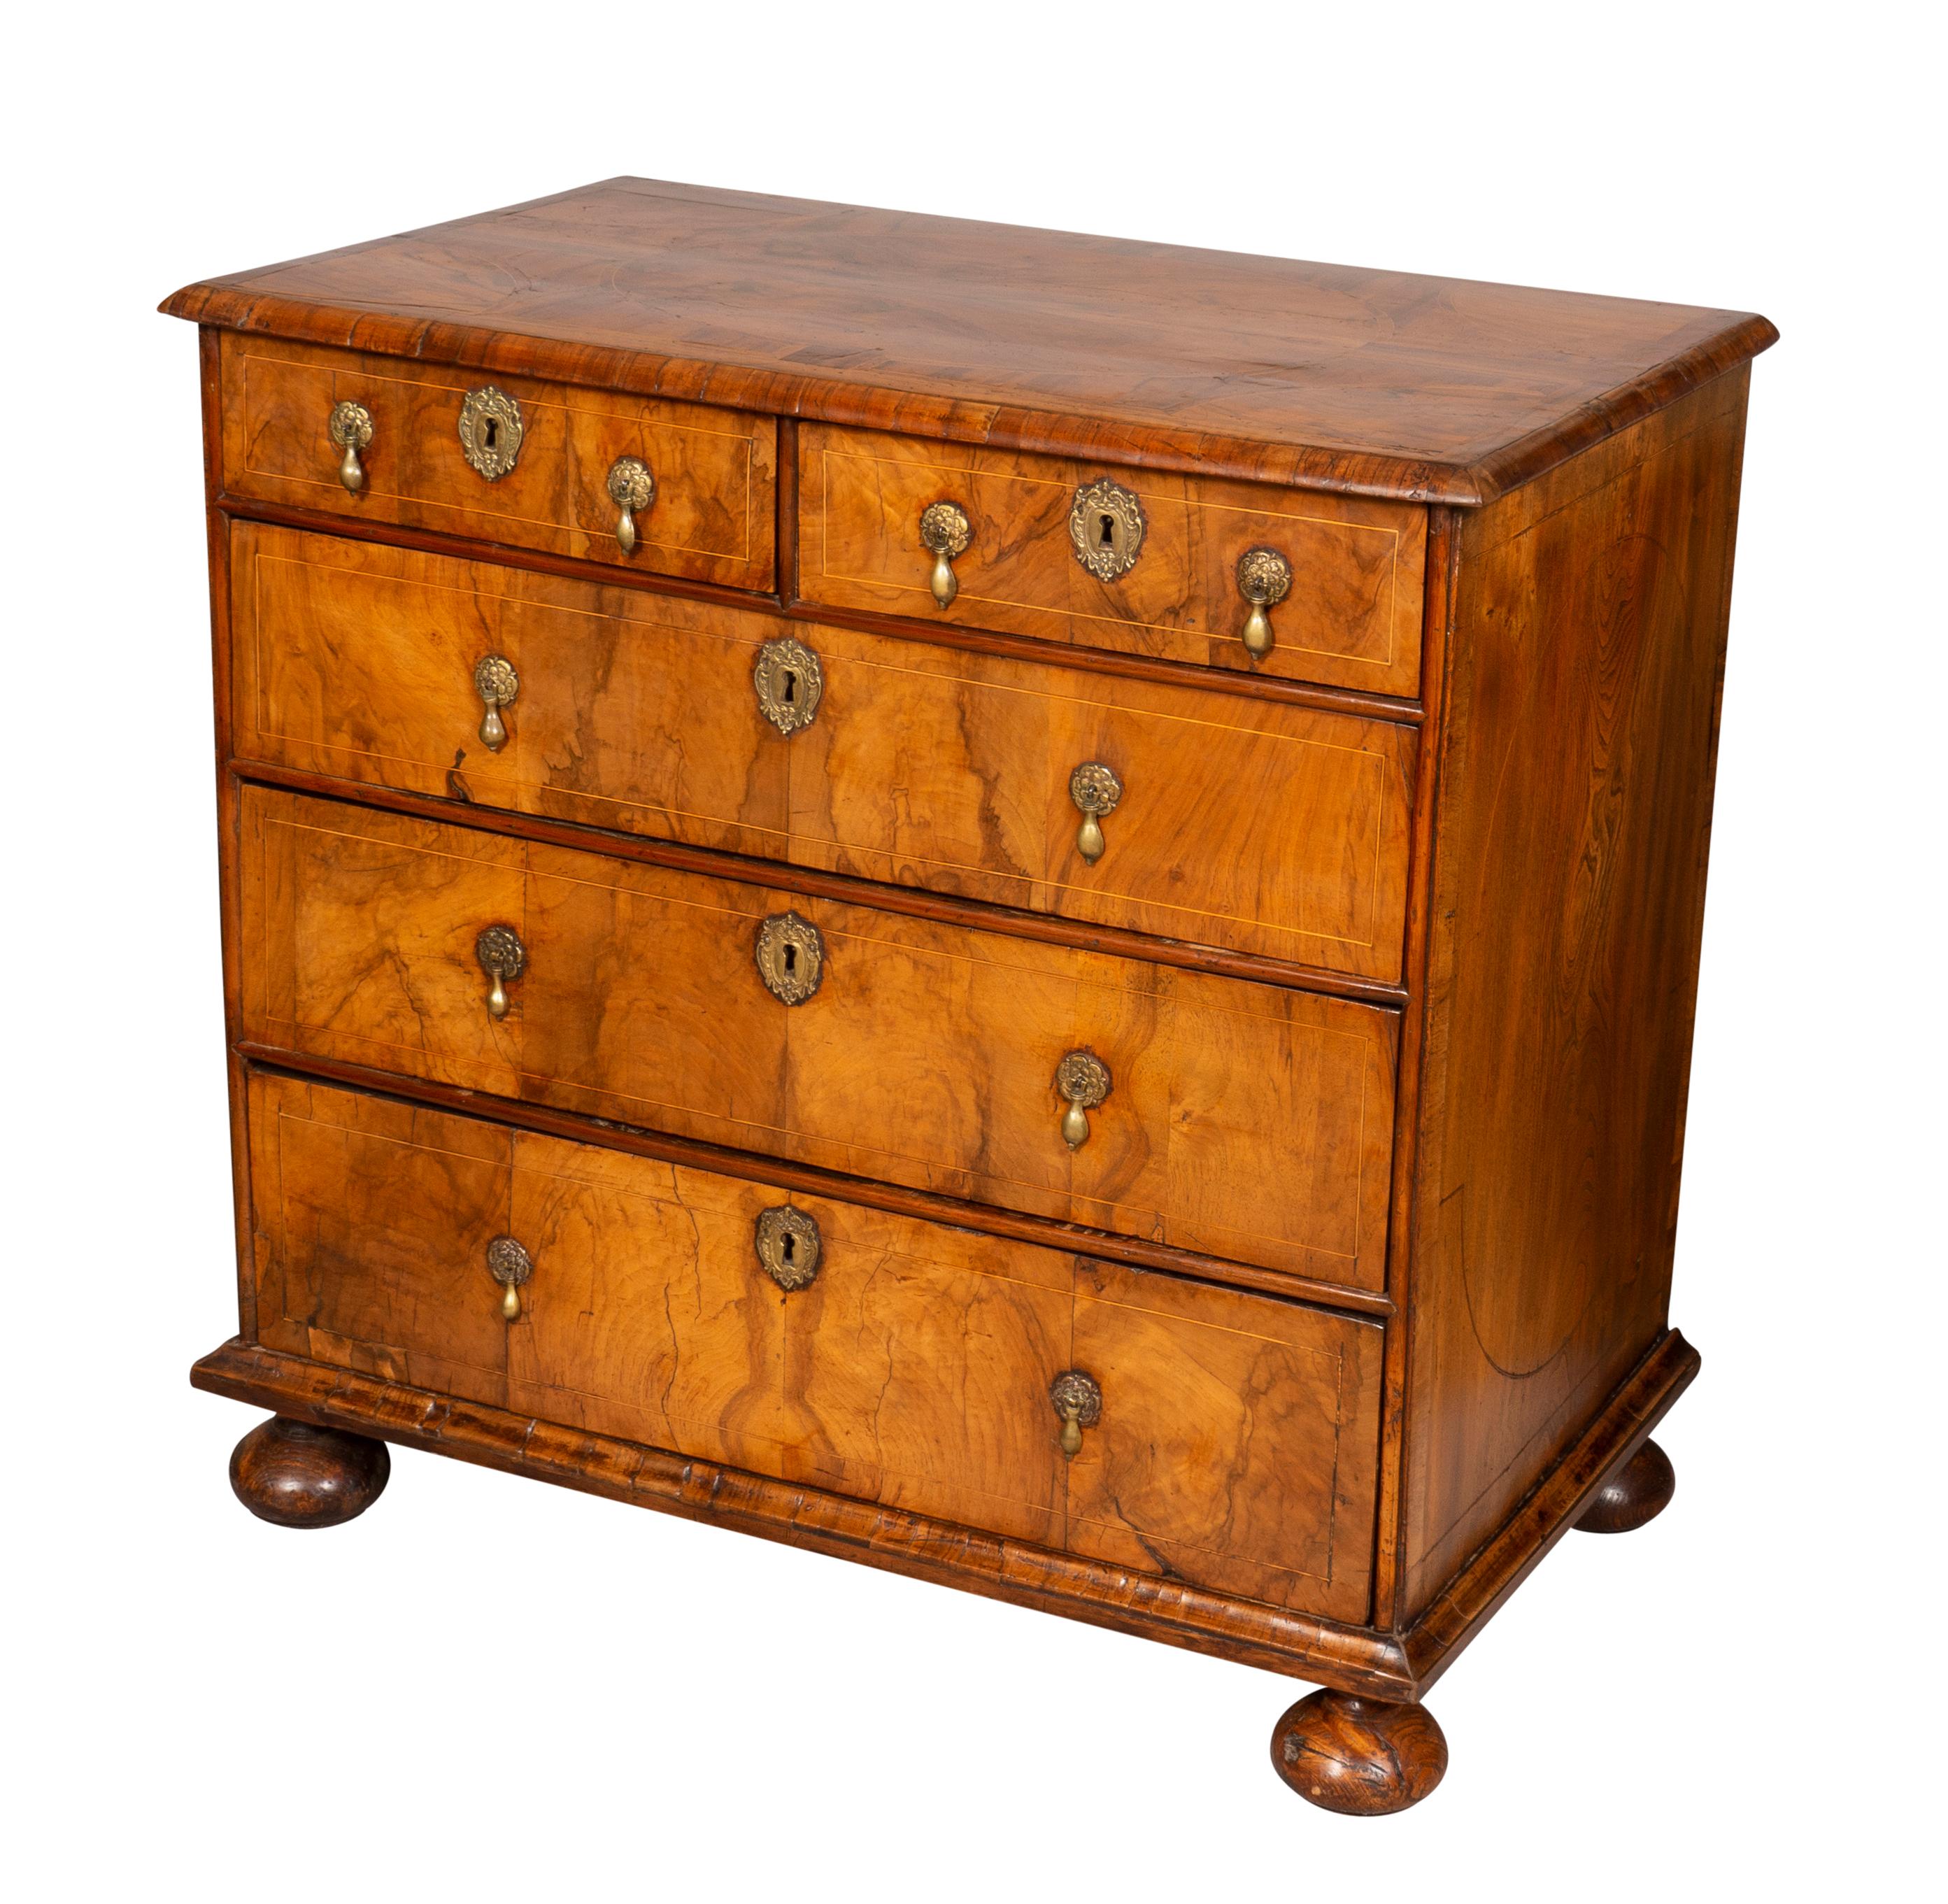 Late 17th Century William and Mary Walnut Chest of Drawers